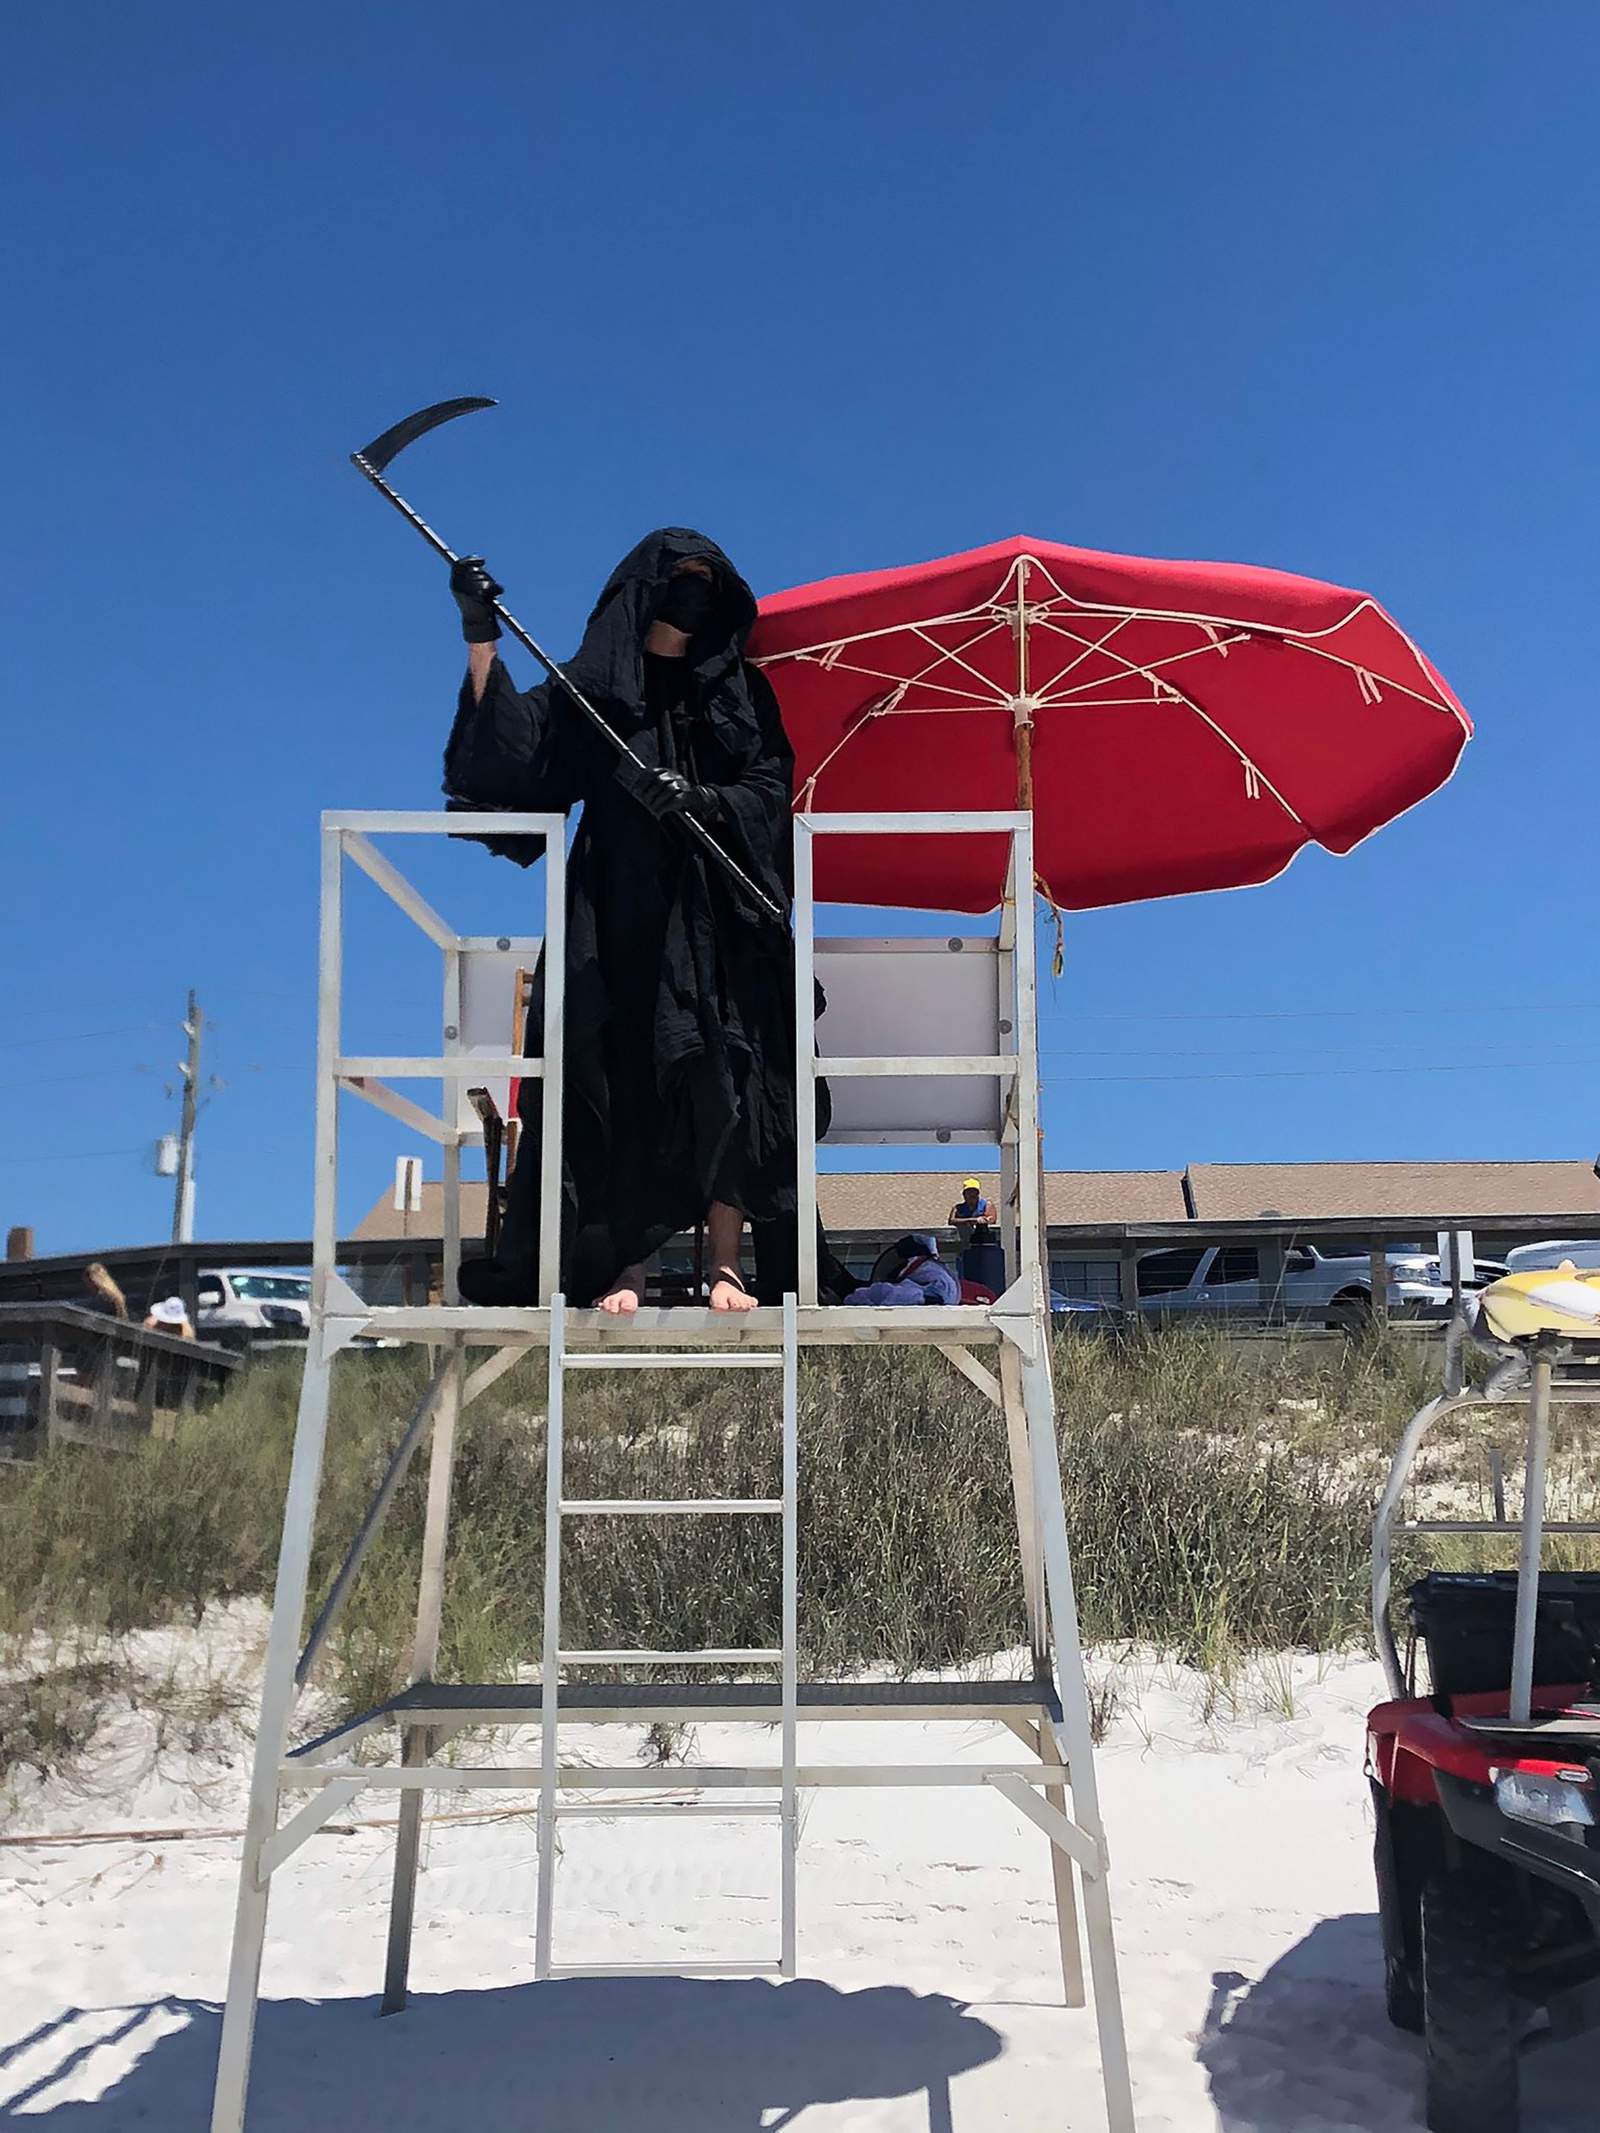 Lawyer dresses as the Grim Reaper to protest Florida’s open beaches